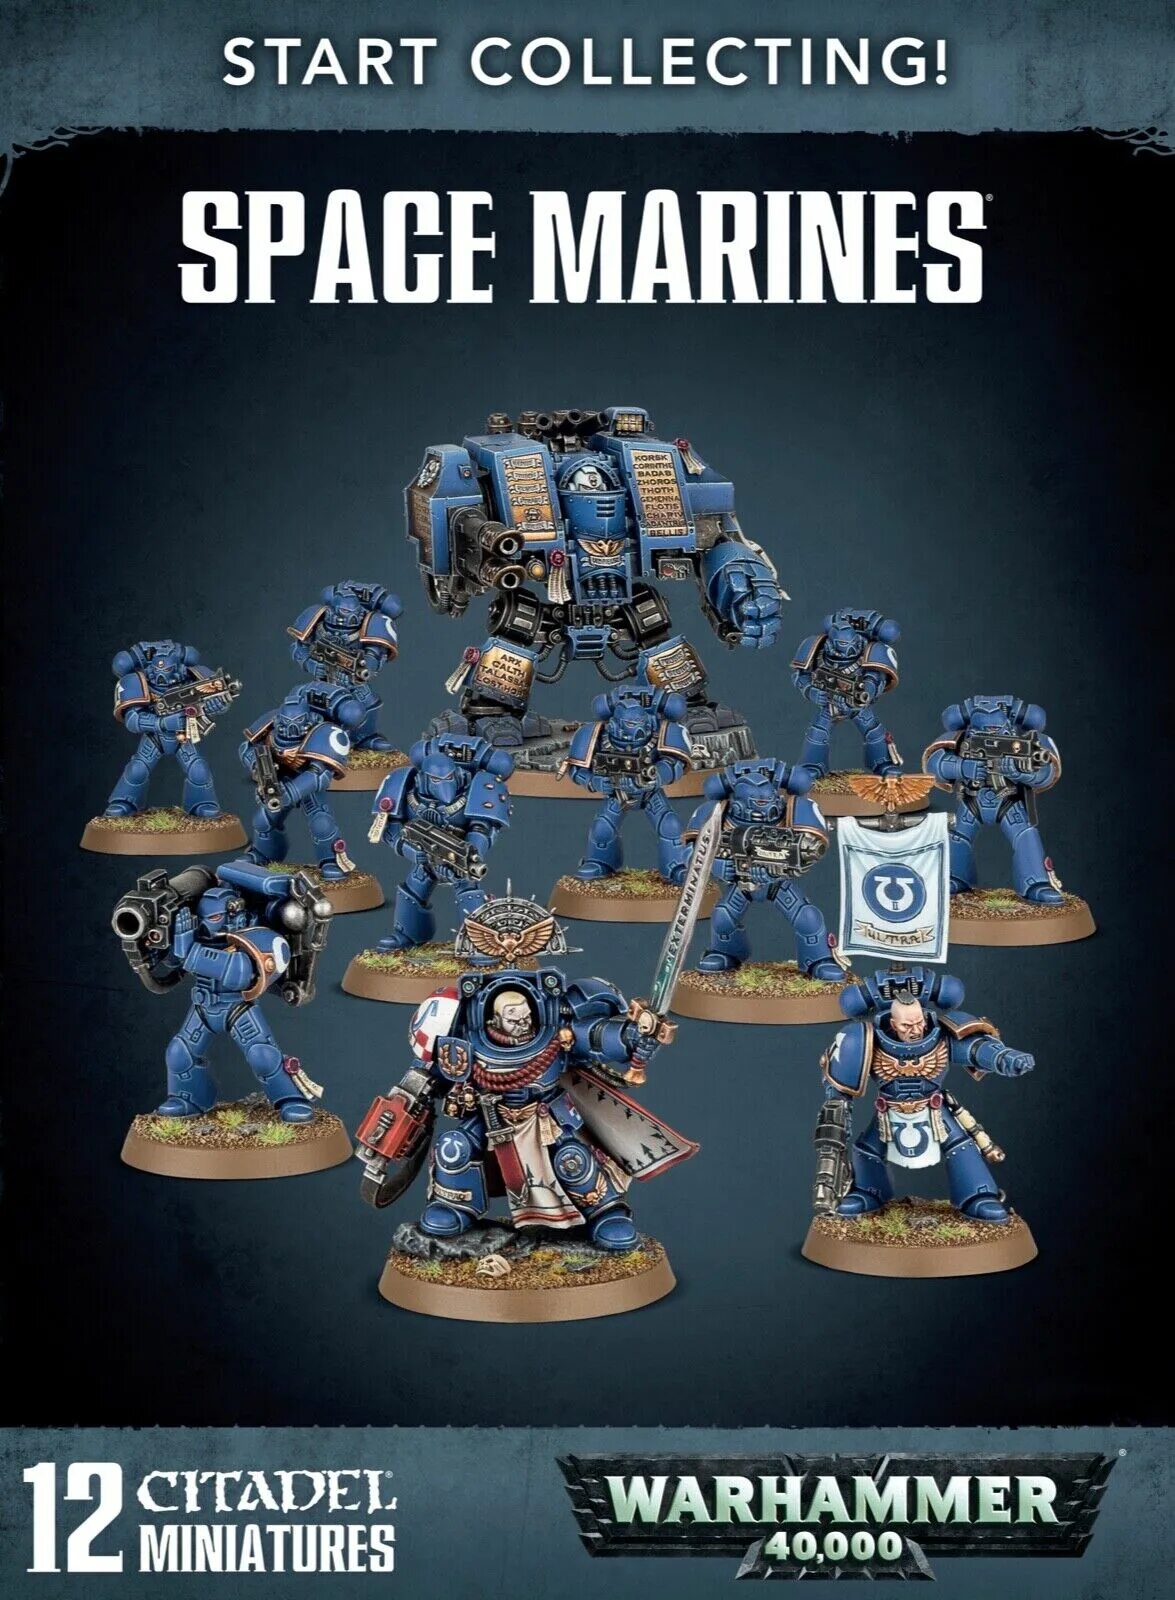 Start collection. Warhammer 40k start collecting Space Marines. Start collecting Космодесант. Warhammer 40k Chaos Space Marines start collecting. Start collecting! Vanguard Space Marines.